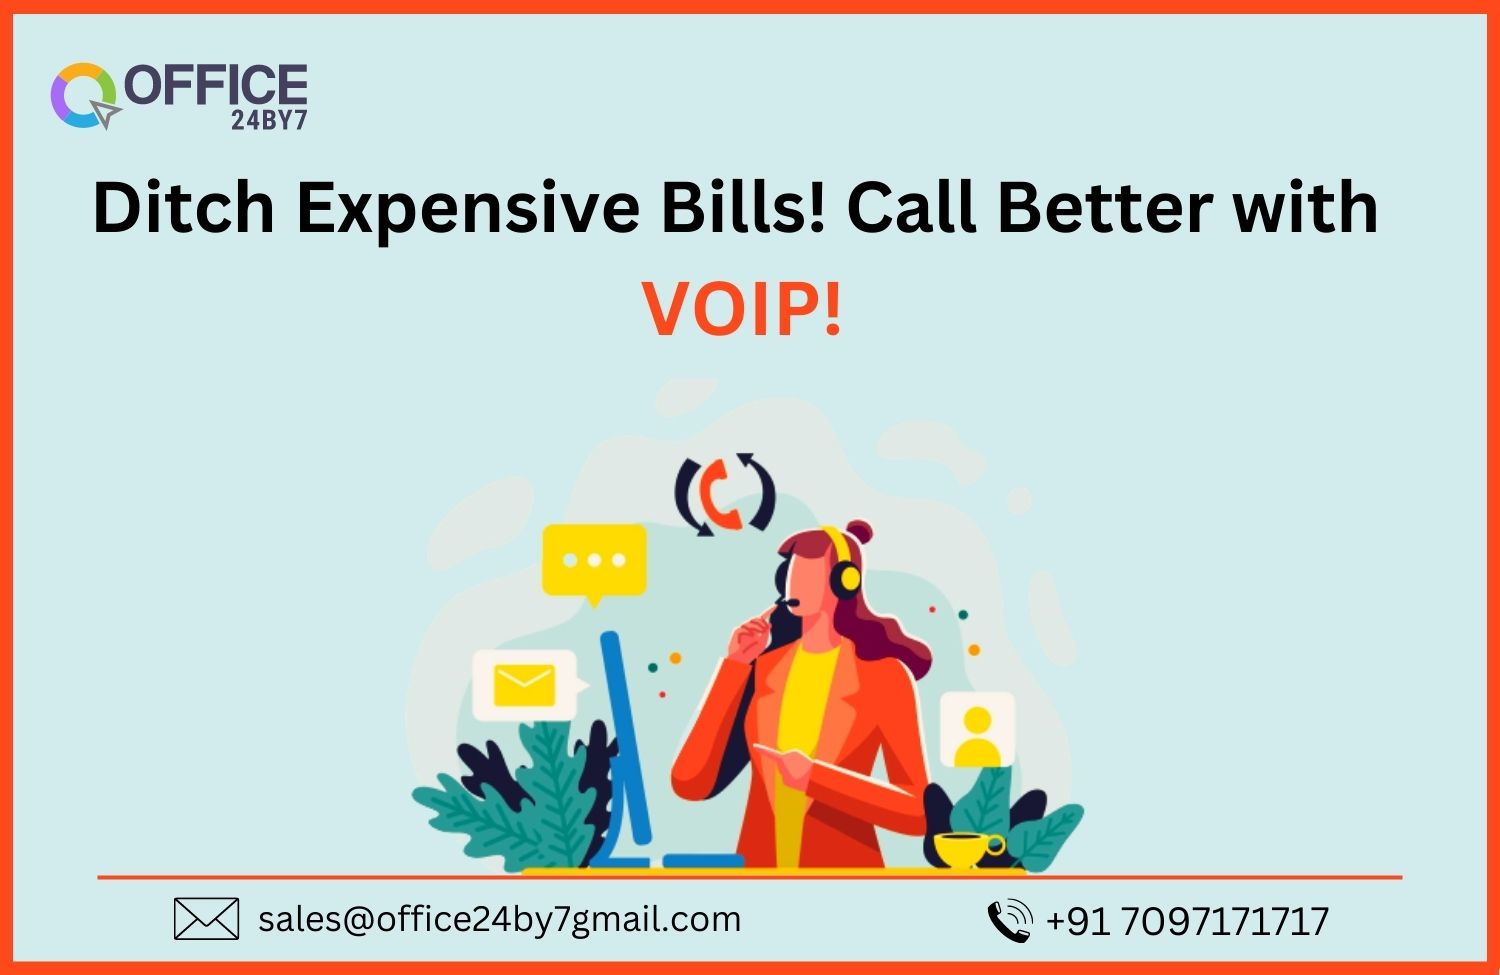 Ditch Expensive Bills! Call Better with VOIP!